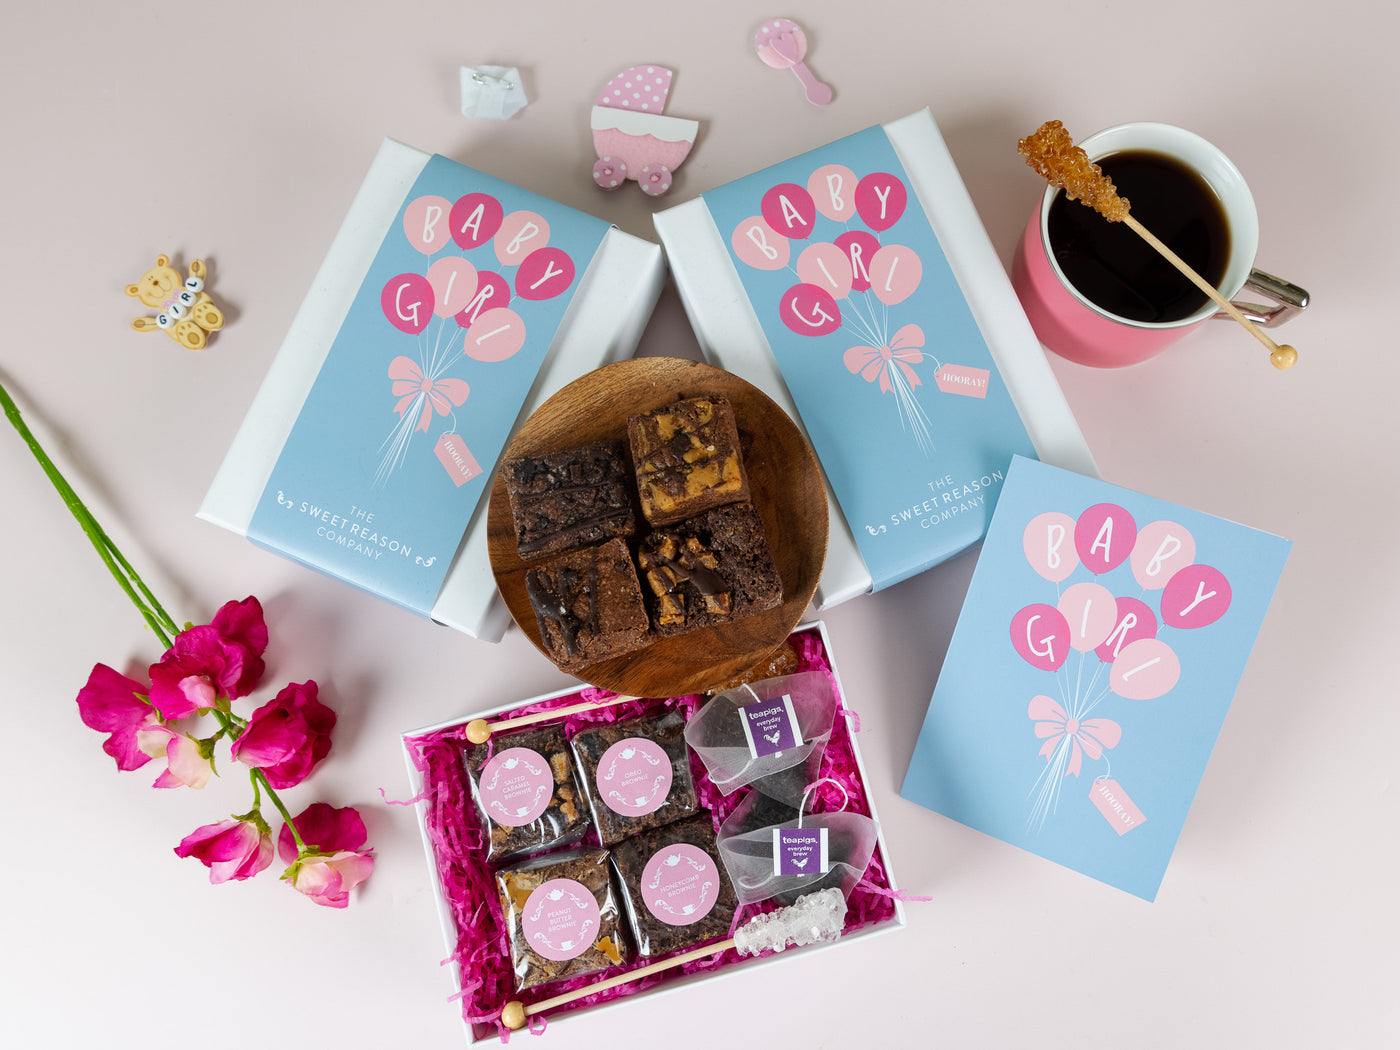 'Baby Girl' Vegan Afternoon Tea For Two Gift